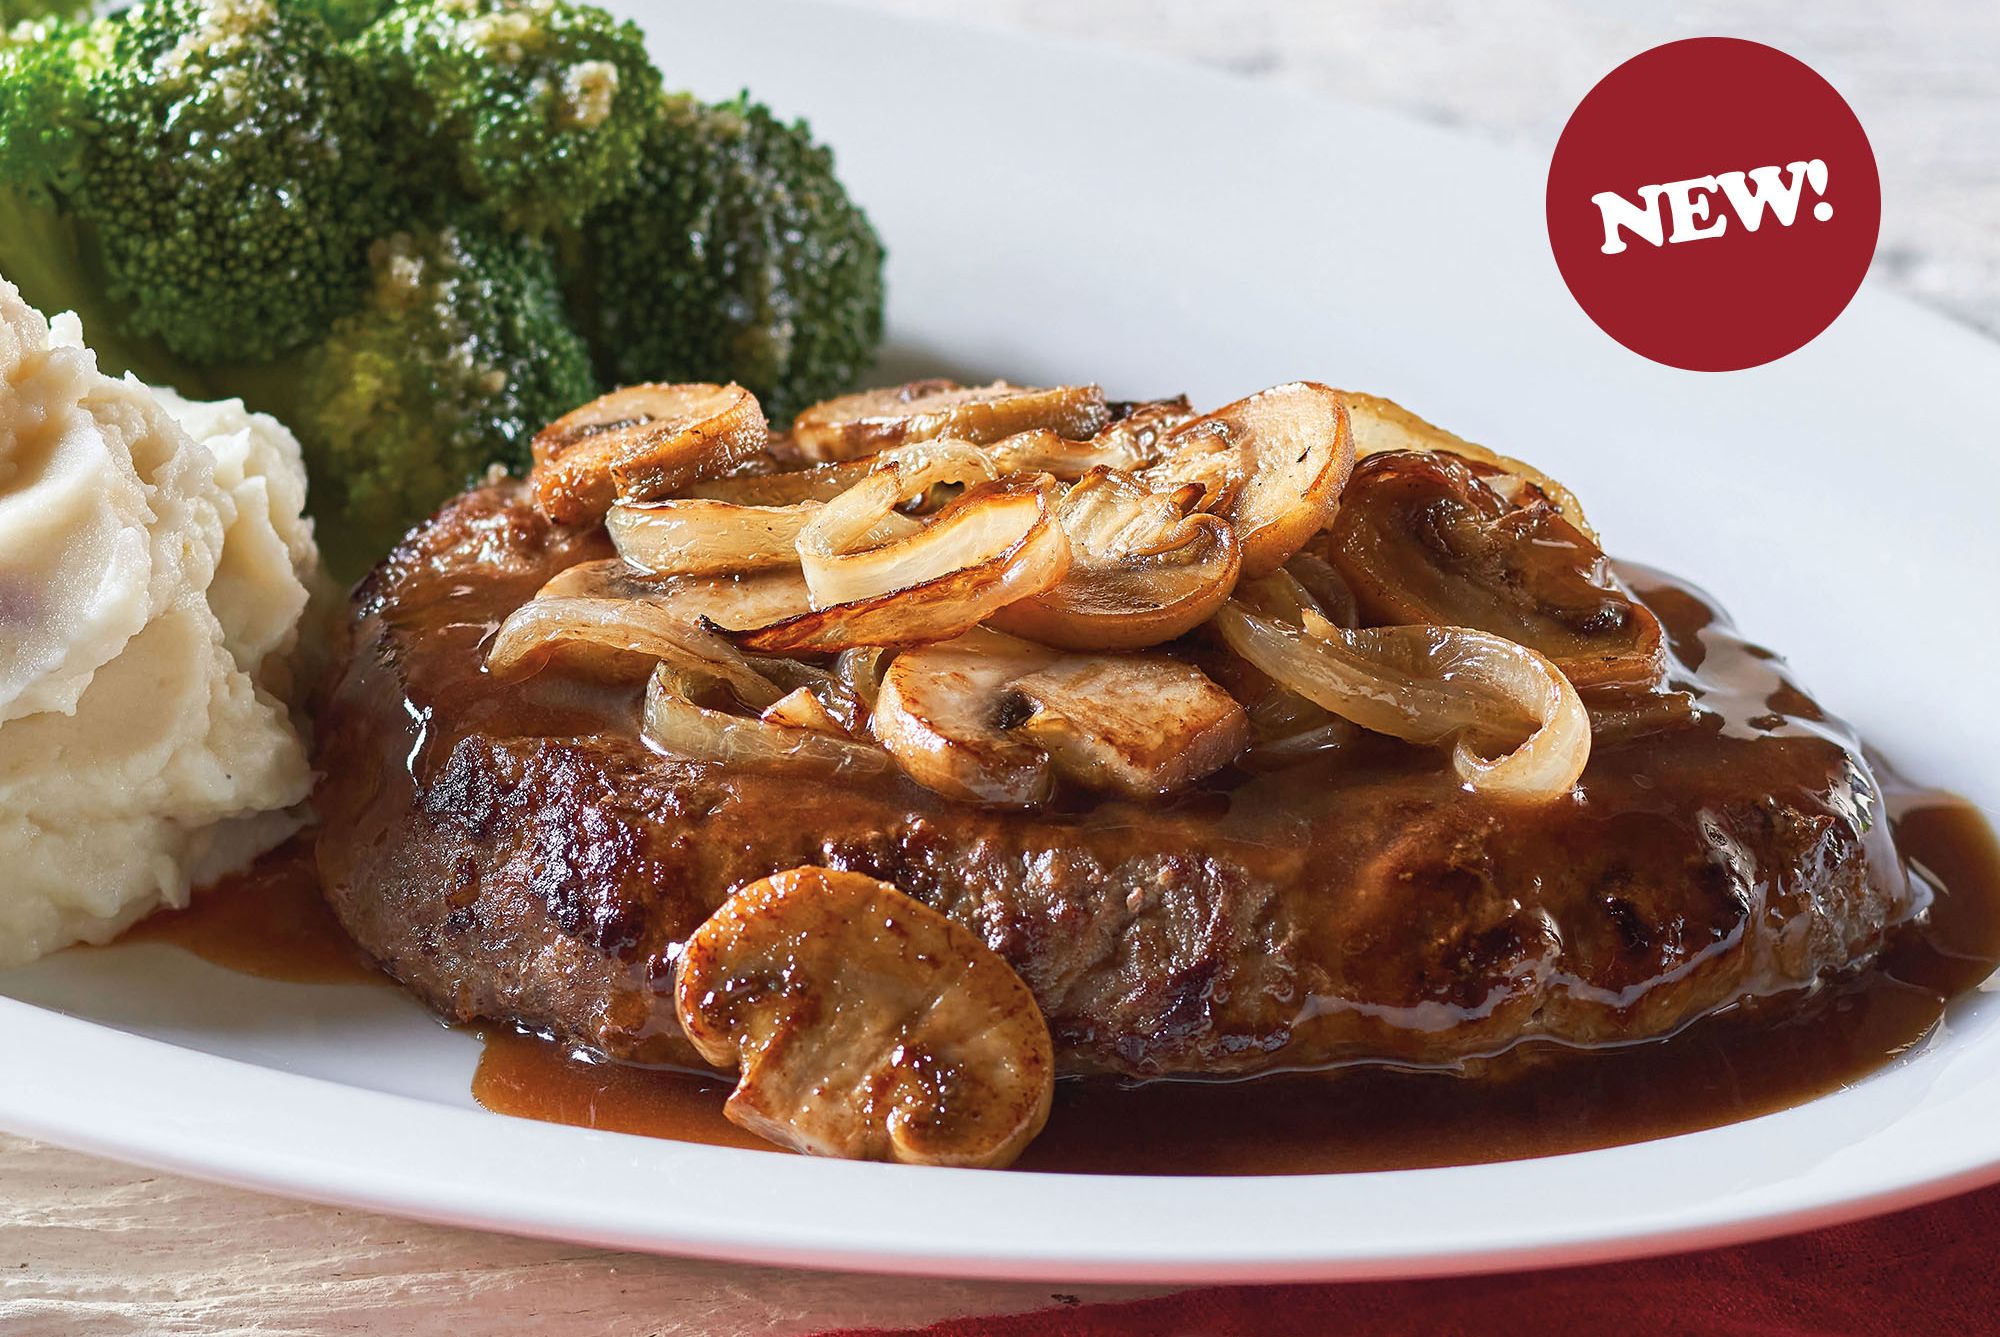 IHOP Premiers their New Sirloin Salisbury Steak for a Limited Time Only